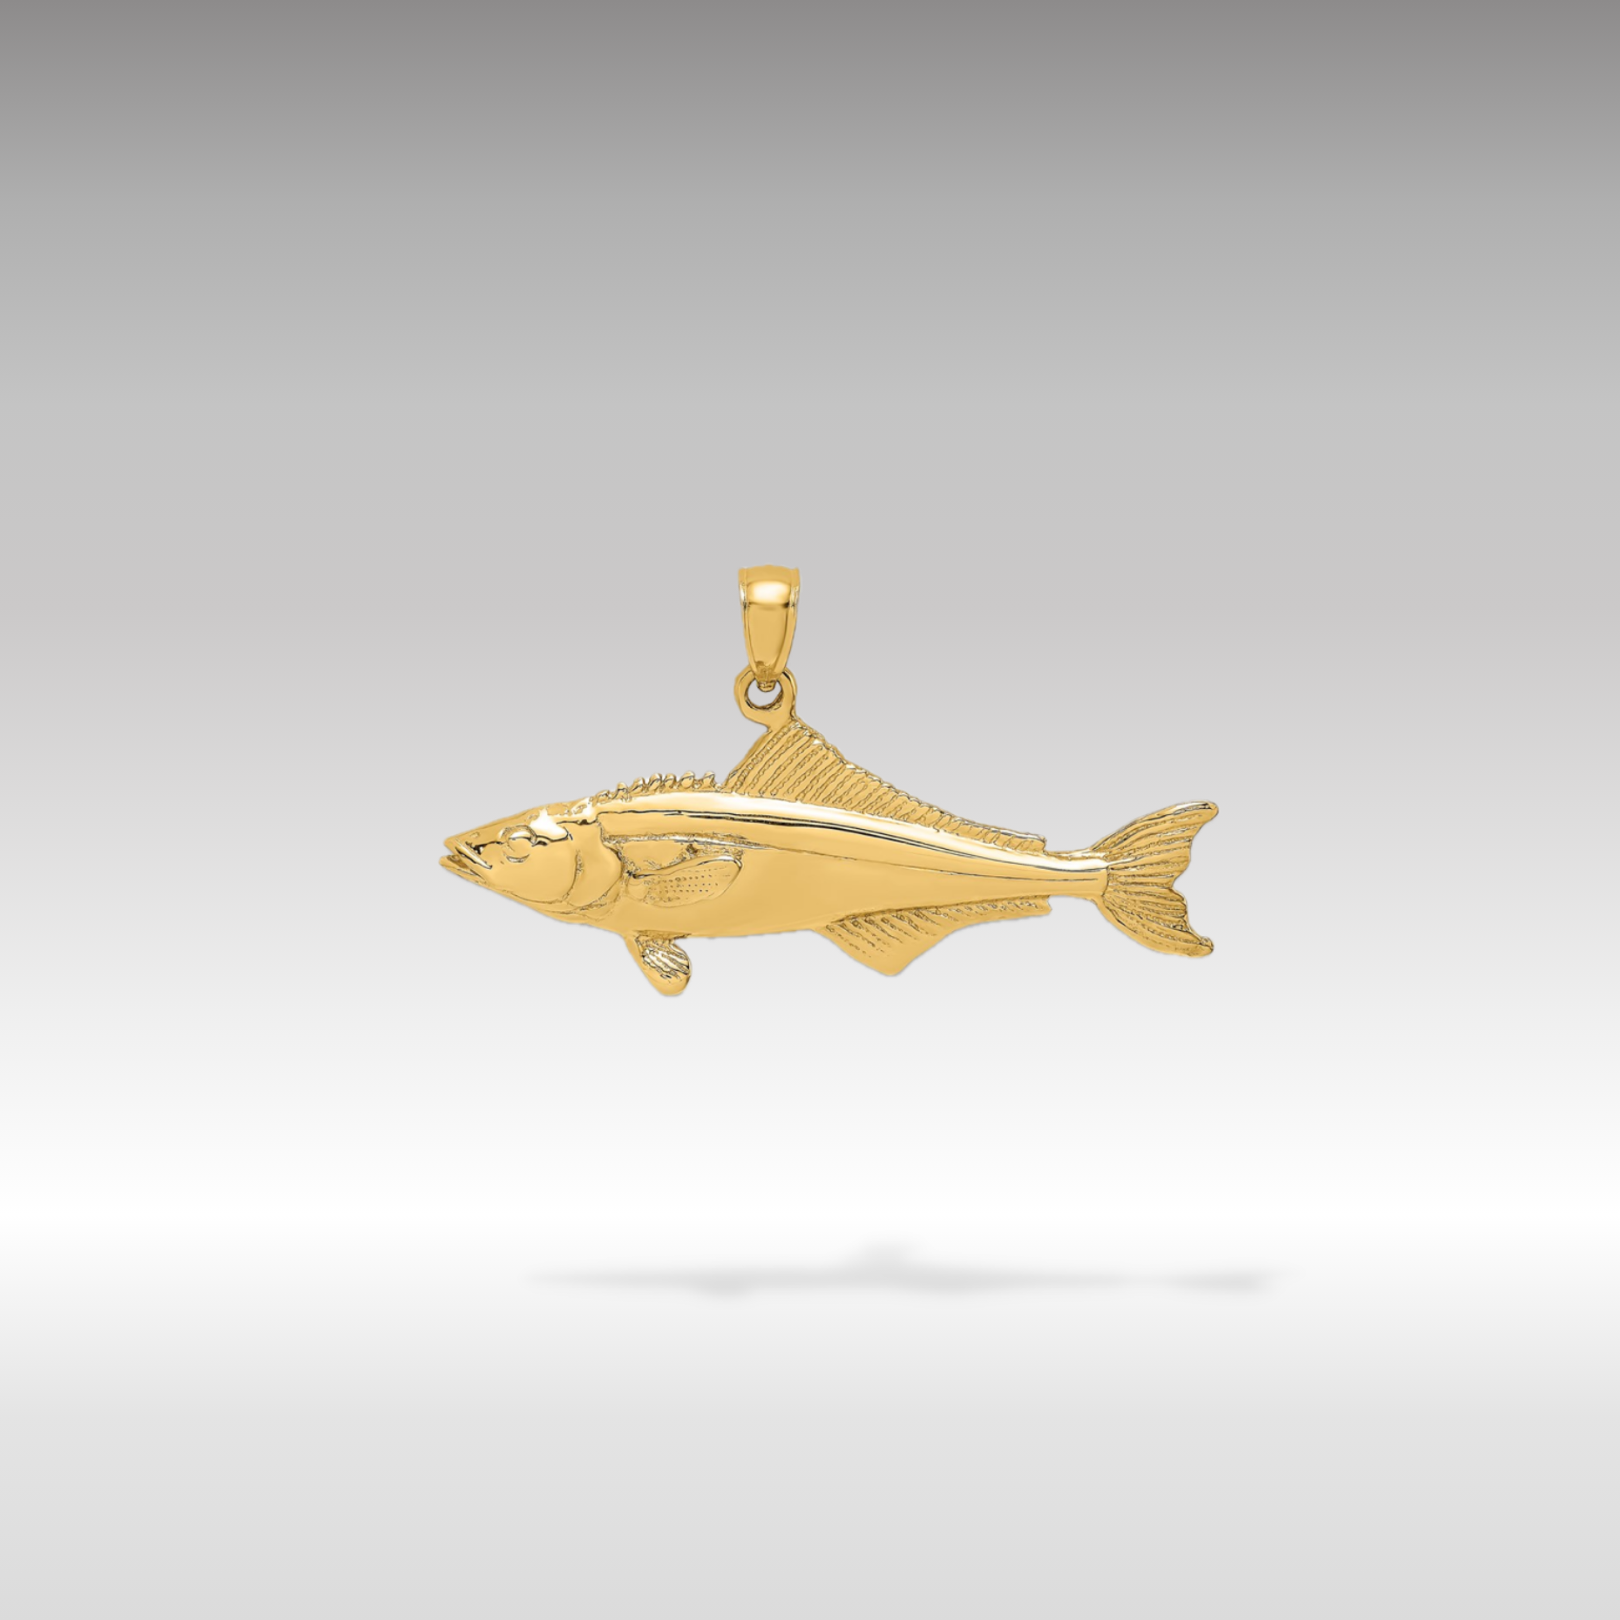 14K Gold 3D Polished Cobia Fish Pendant - Charlie & Co. Jewelry